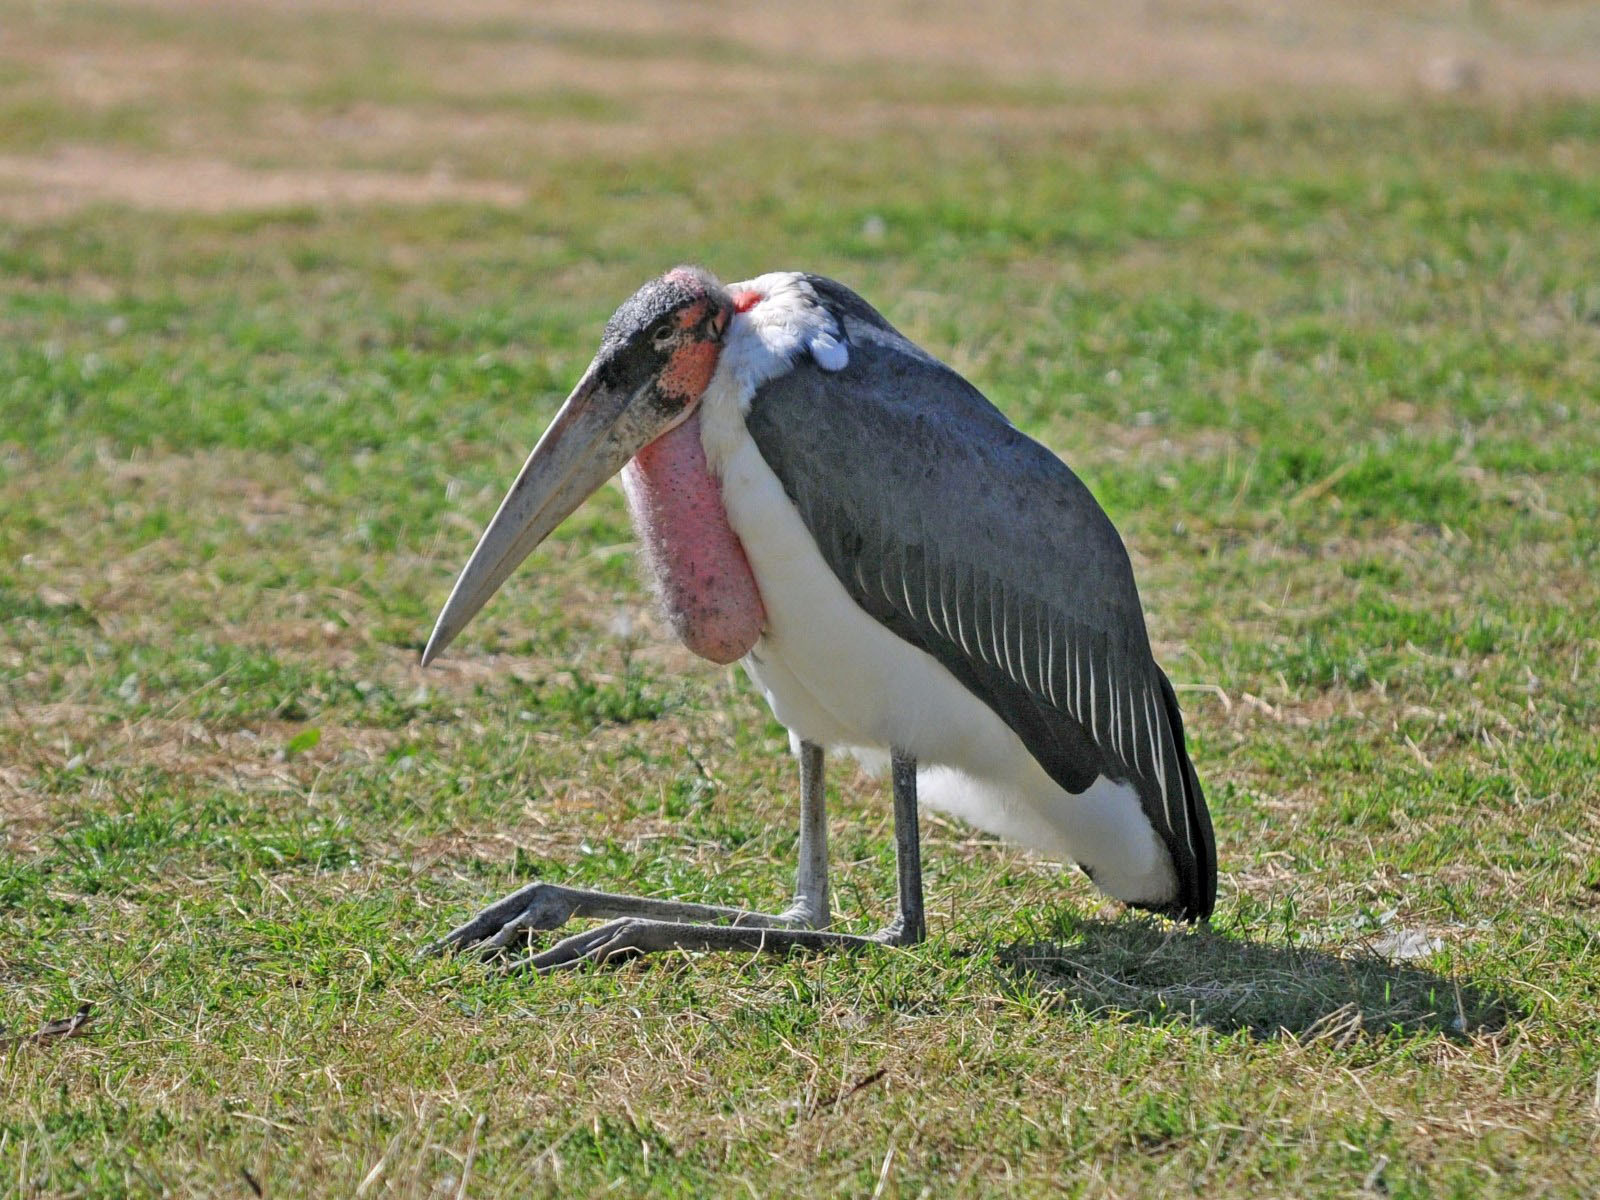 The Marabou stork. A mean, ugly peice of work. - Album on Imgur